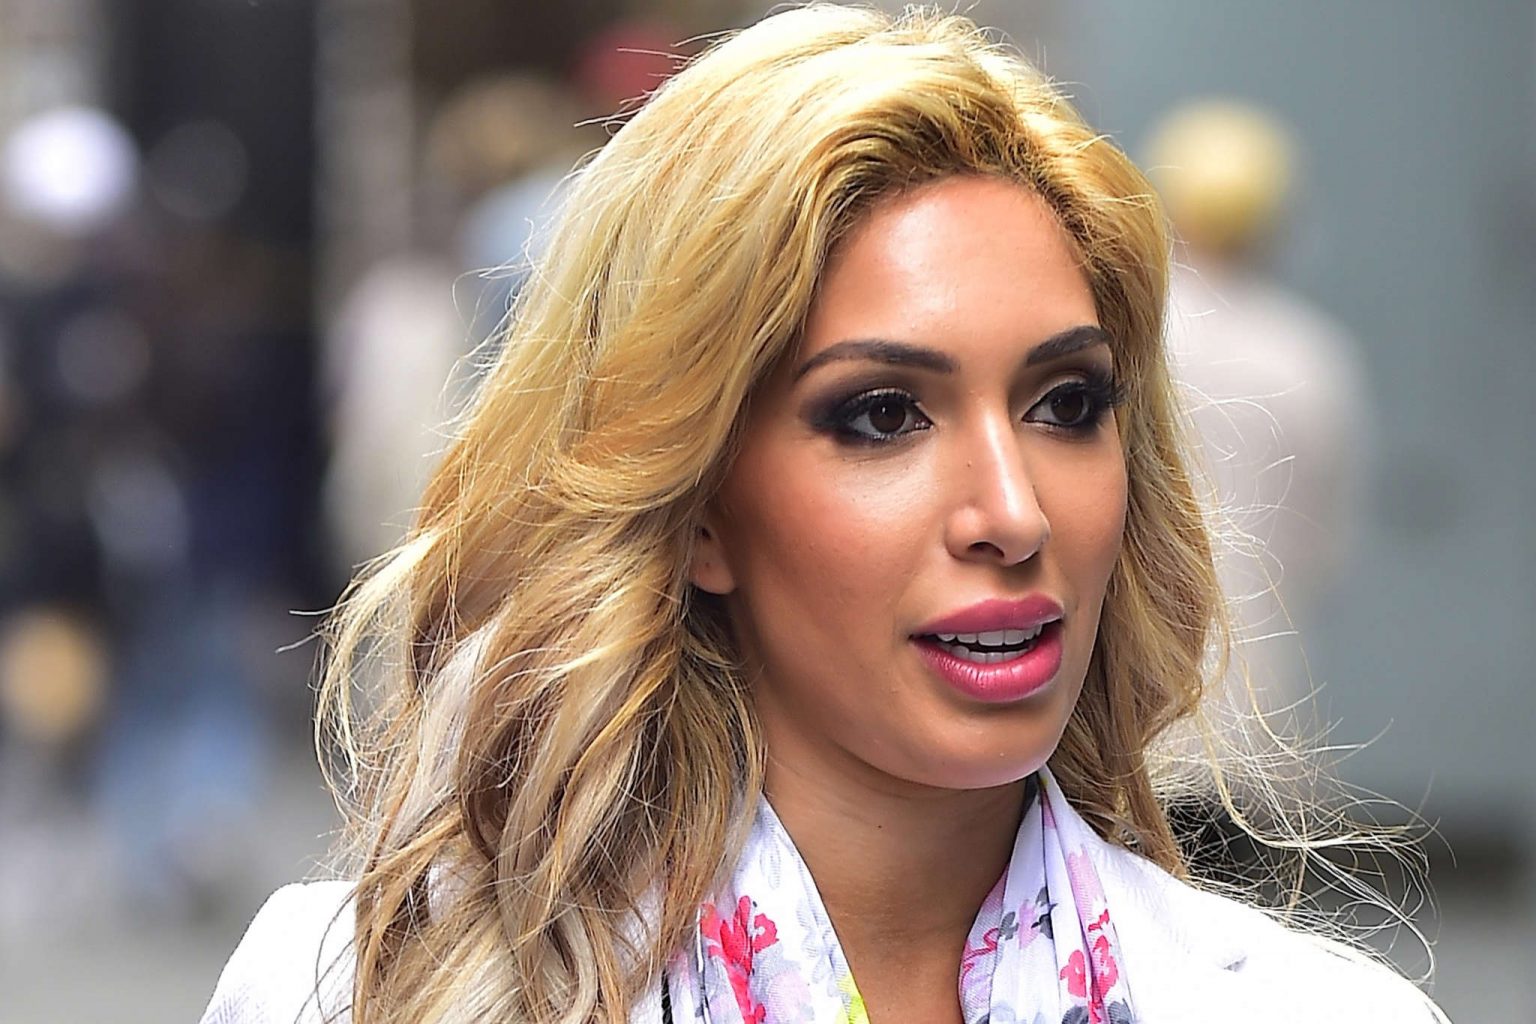 Farrah Abraham Ethnicity, Race and Nationality.